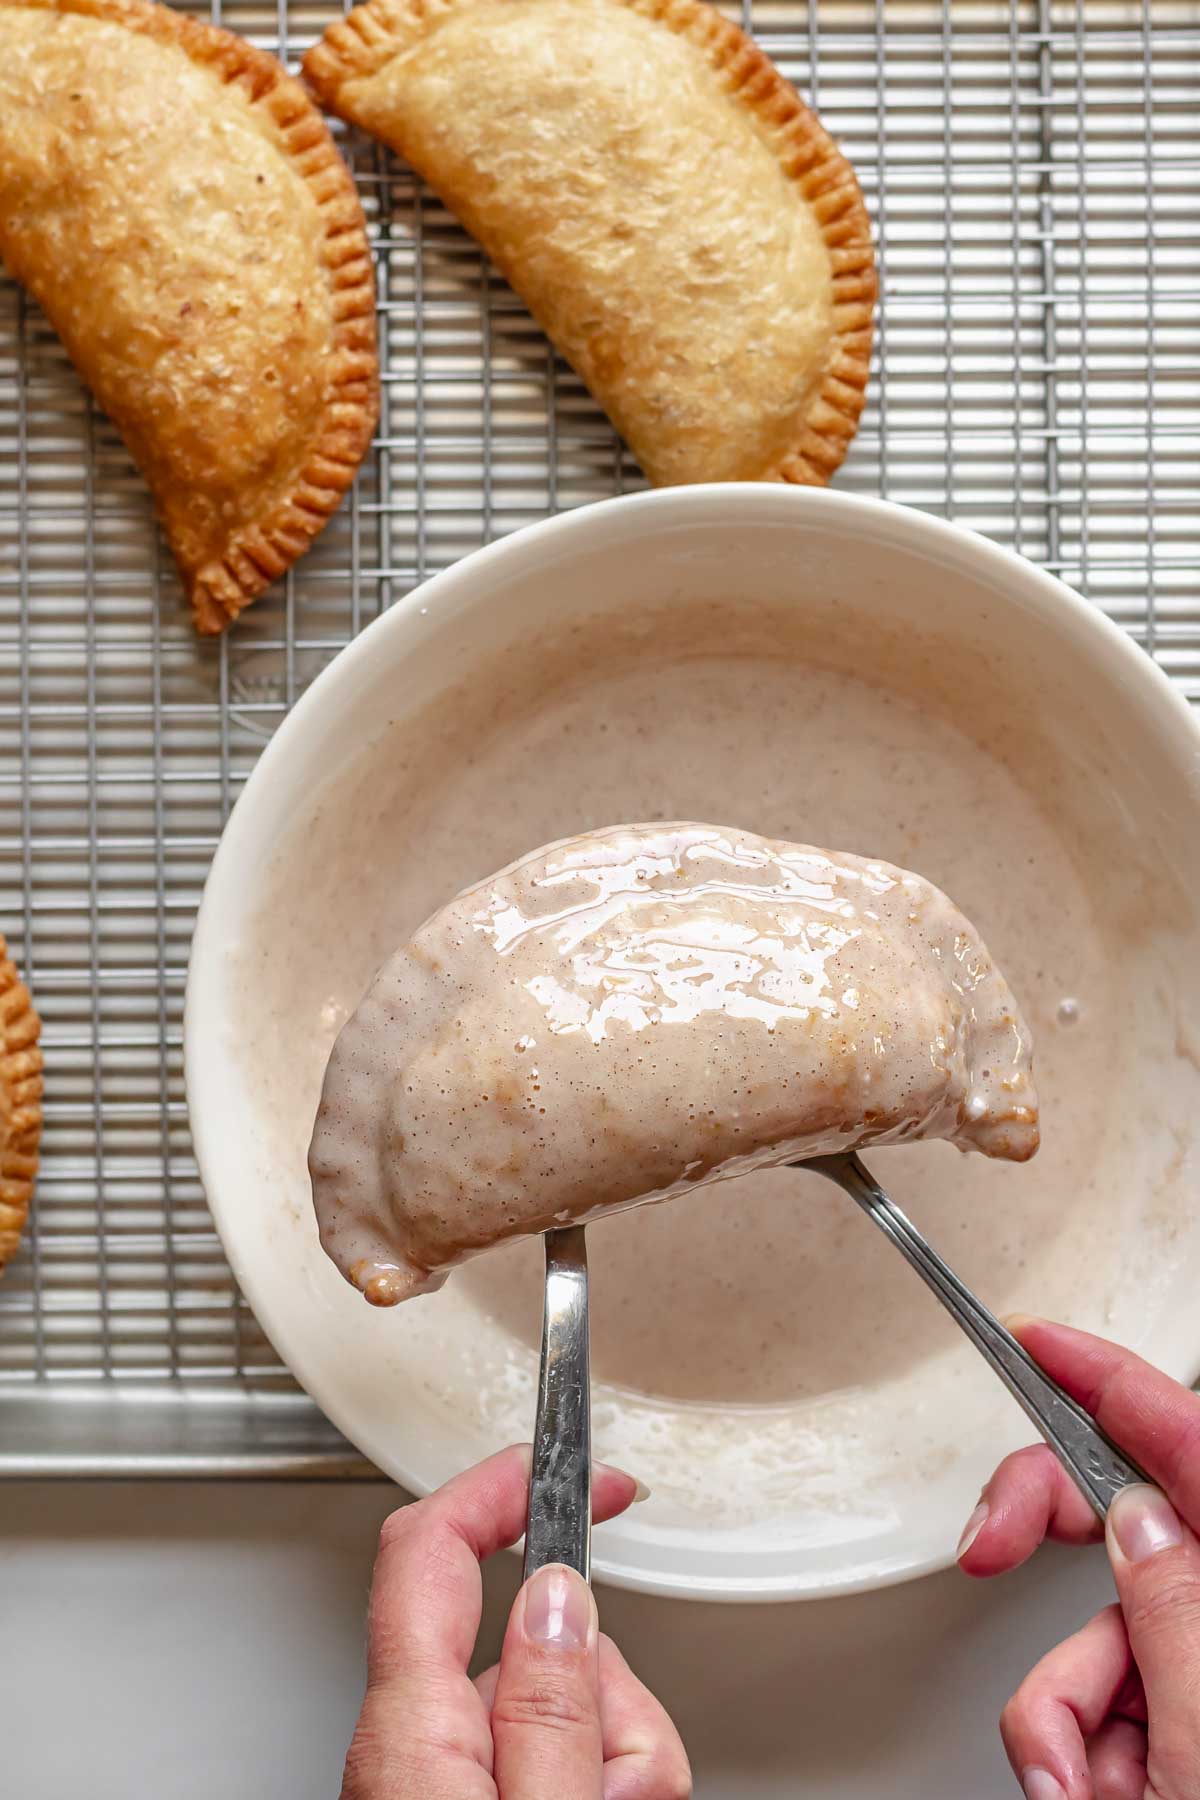 Two forks lifting a glazed fried peach pie out of a bowl.